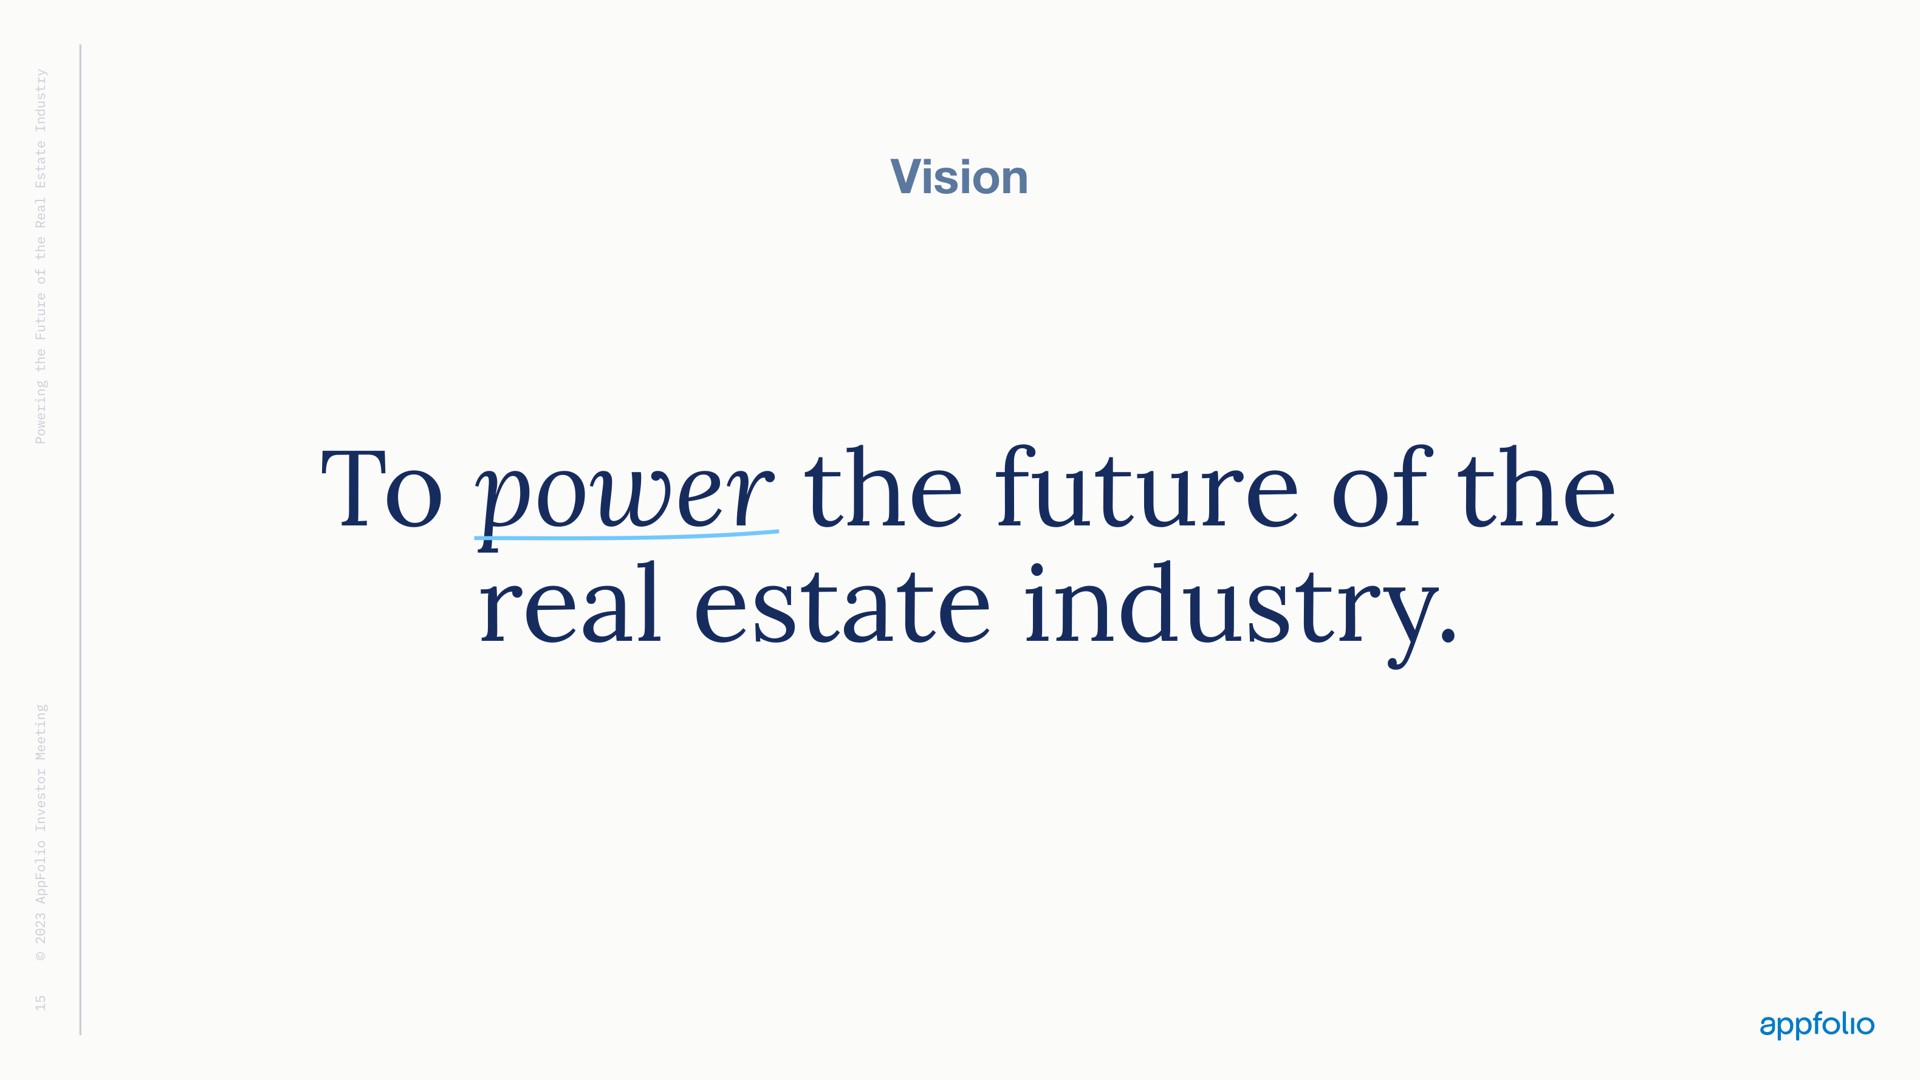 vision to power the future of the real estate industry | AppFolio